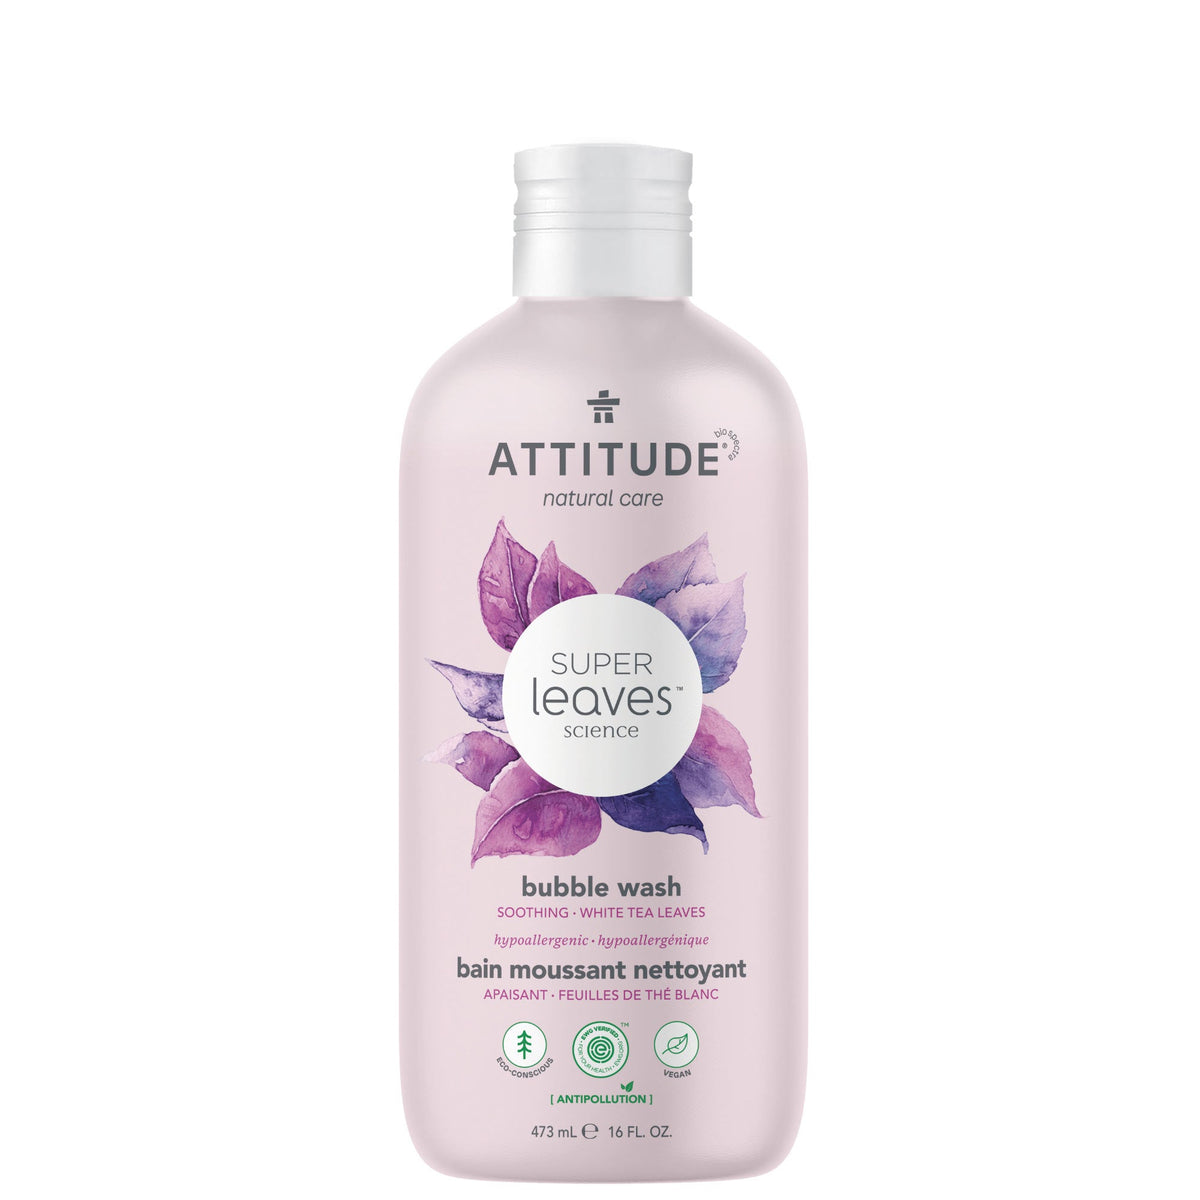 Bubble wash : SUPER LEAVES™ - White Tea Leaves - ProCare Outlet by Attitude